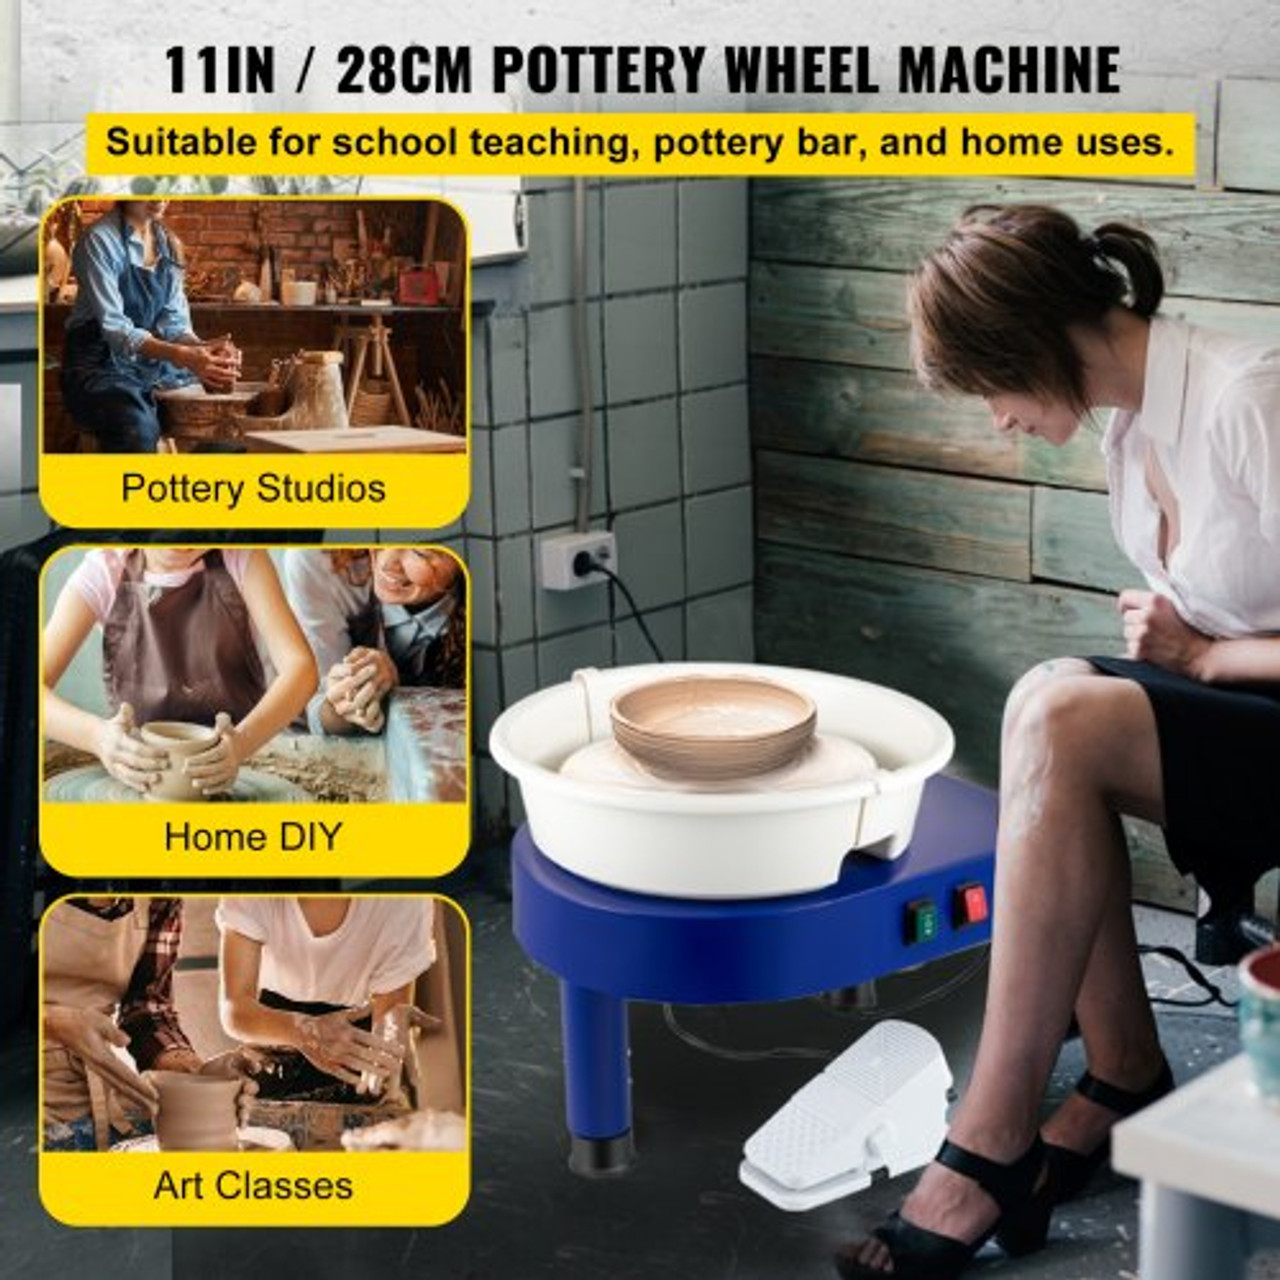 Pottery Wheel, 11in Ceramic Wheel Forming Machine, 0-300RPM Speed Manual Adjustable 0-7.8in Lift Leg, Foot Pedal Detachable Basin, Sculpting Tool Accessory Kit for Work Art Craft DIY